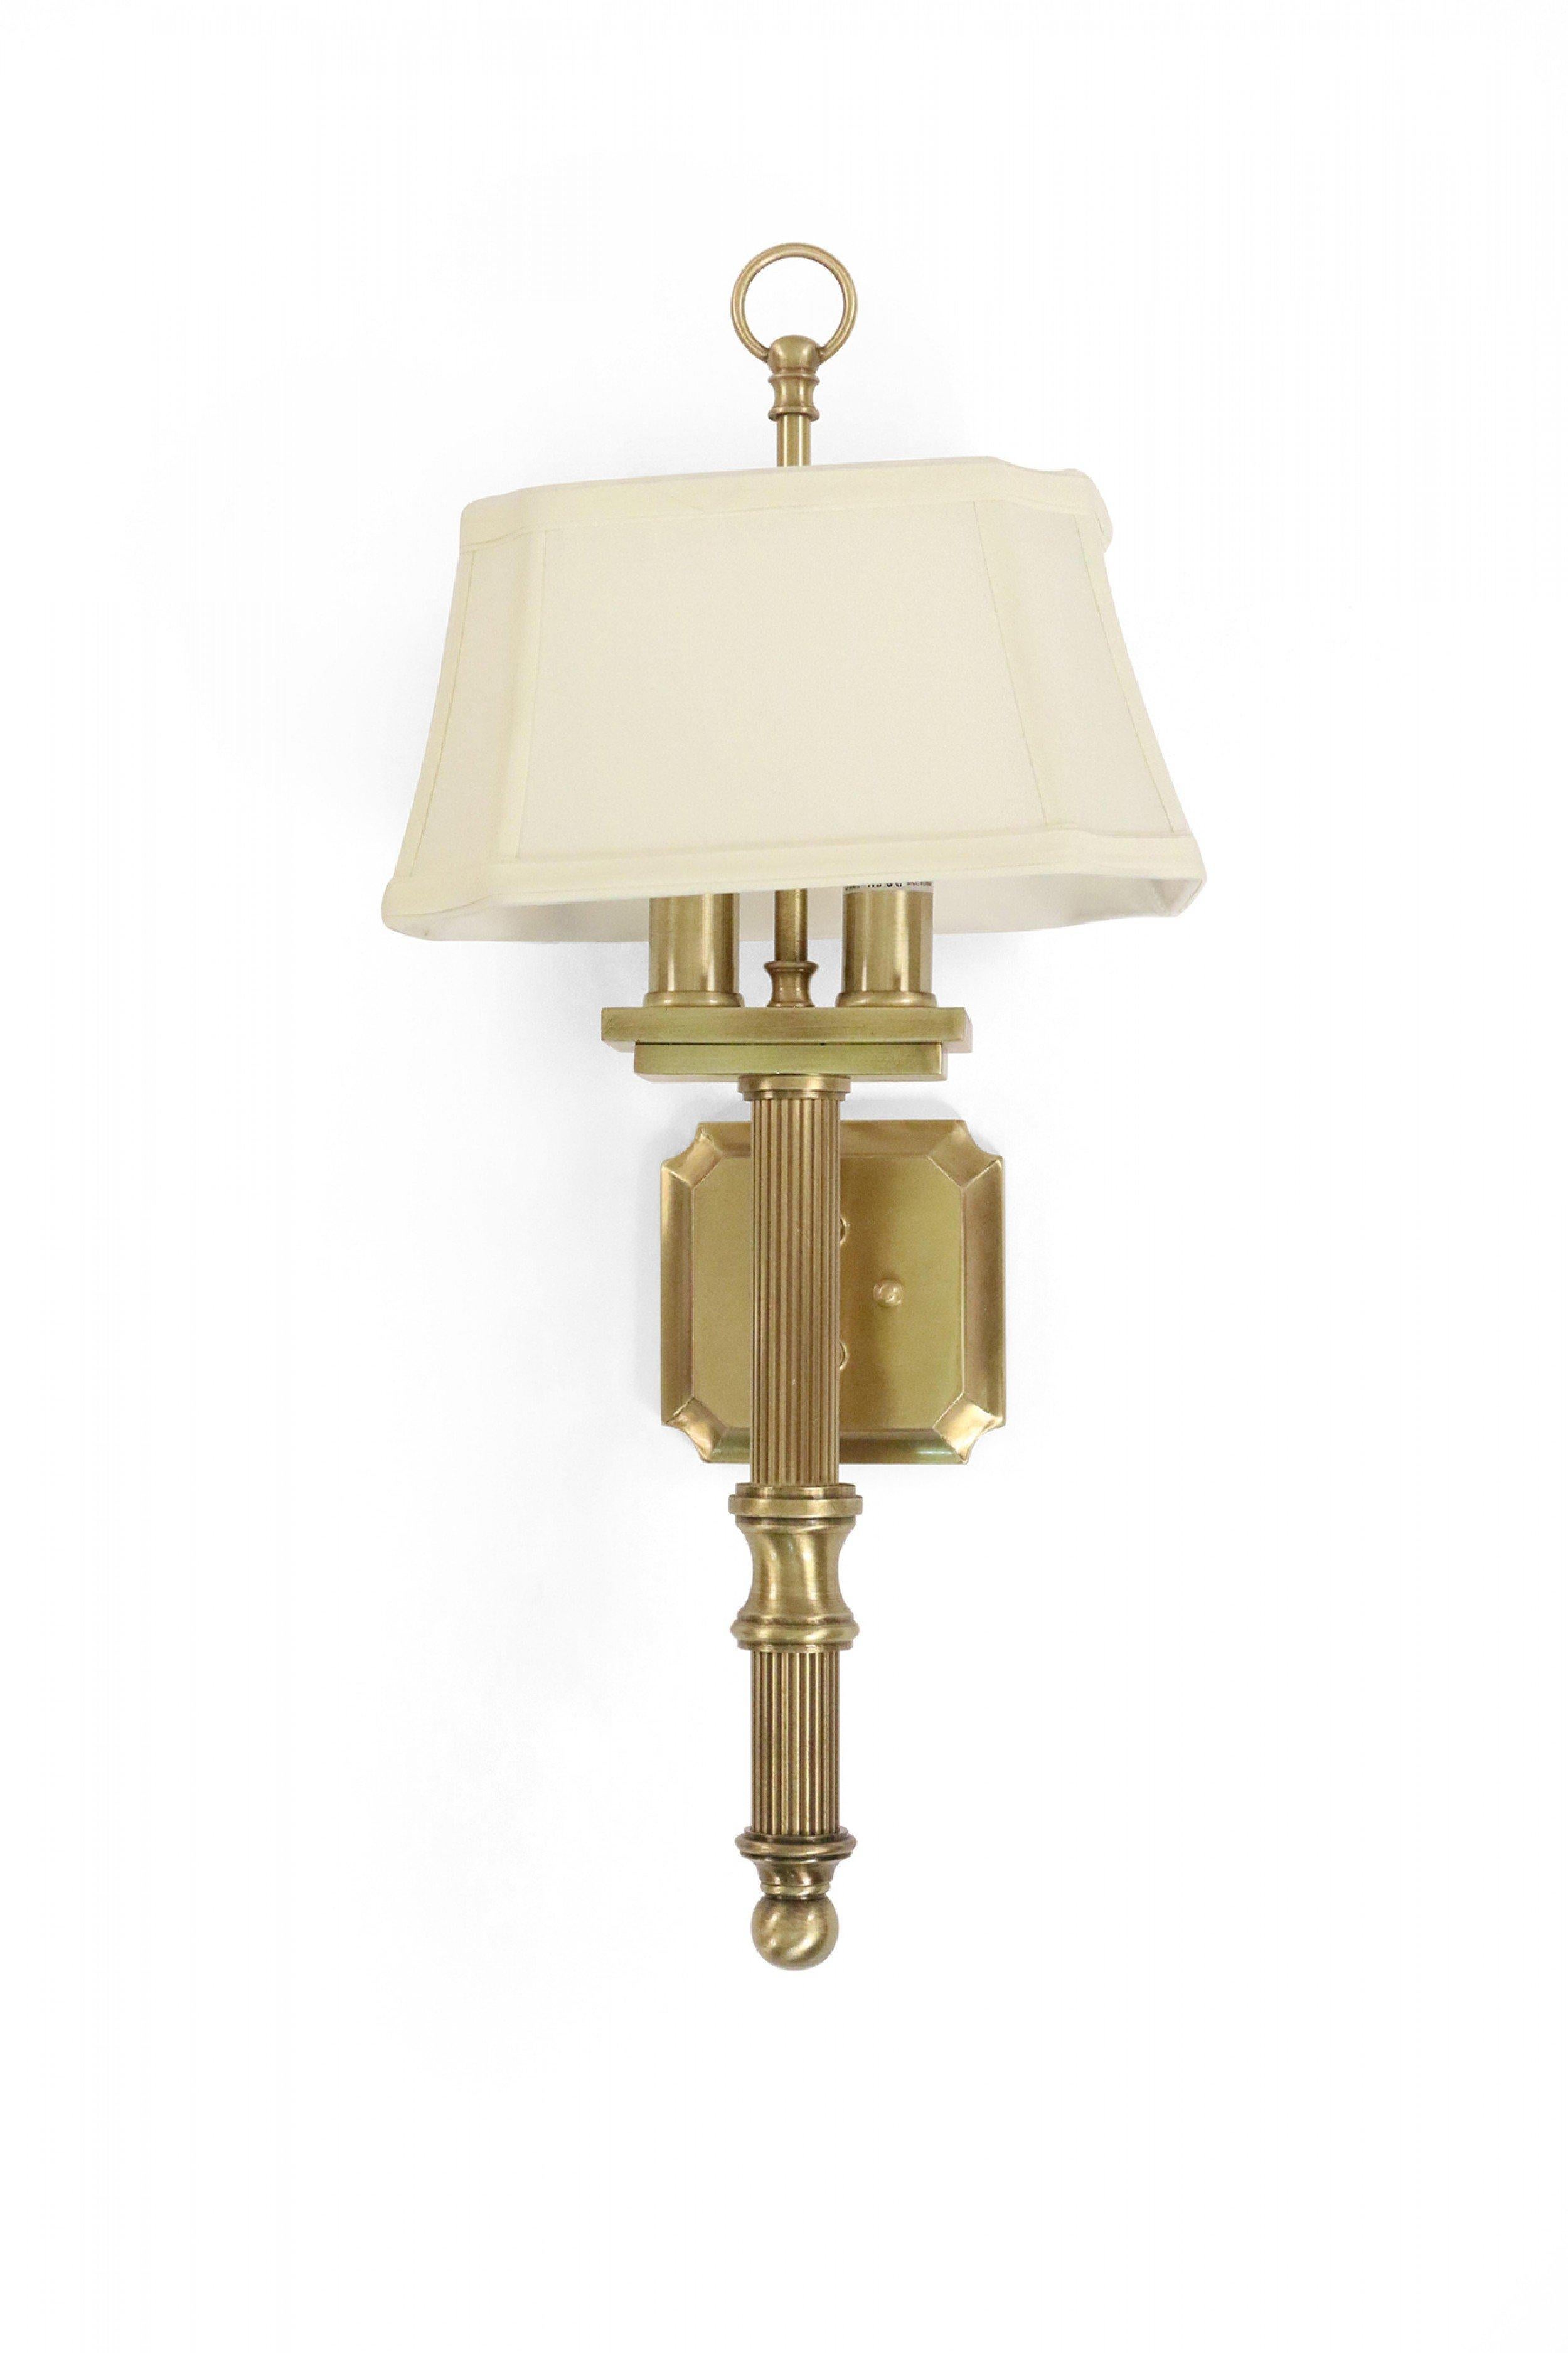 8 Contemporary matte brass finish wall sconces with grooved detail and beige fabric shades (PRICED EACH).
 